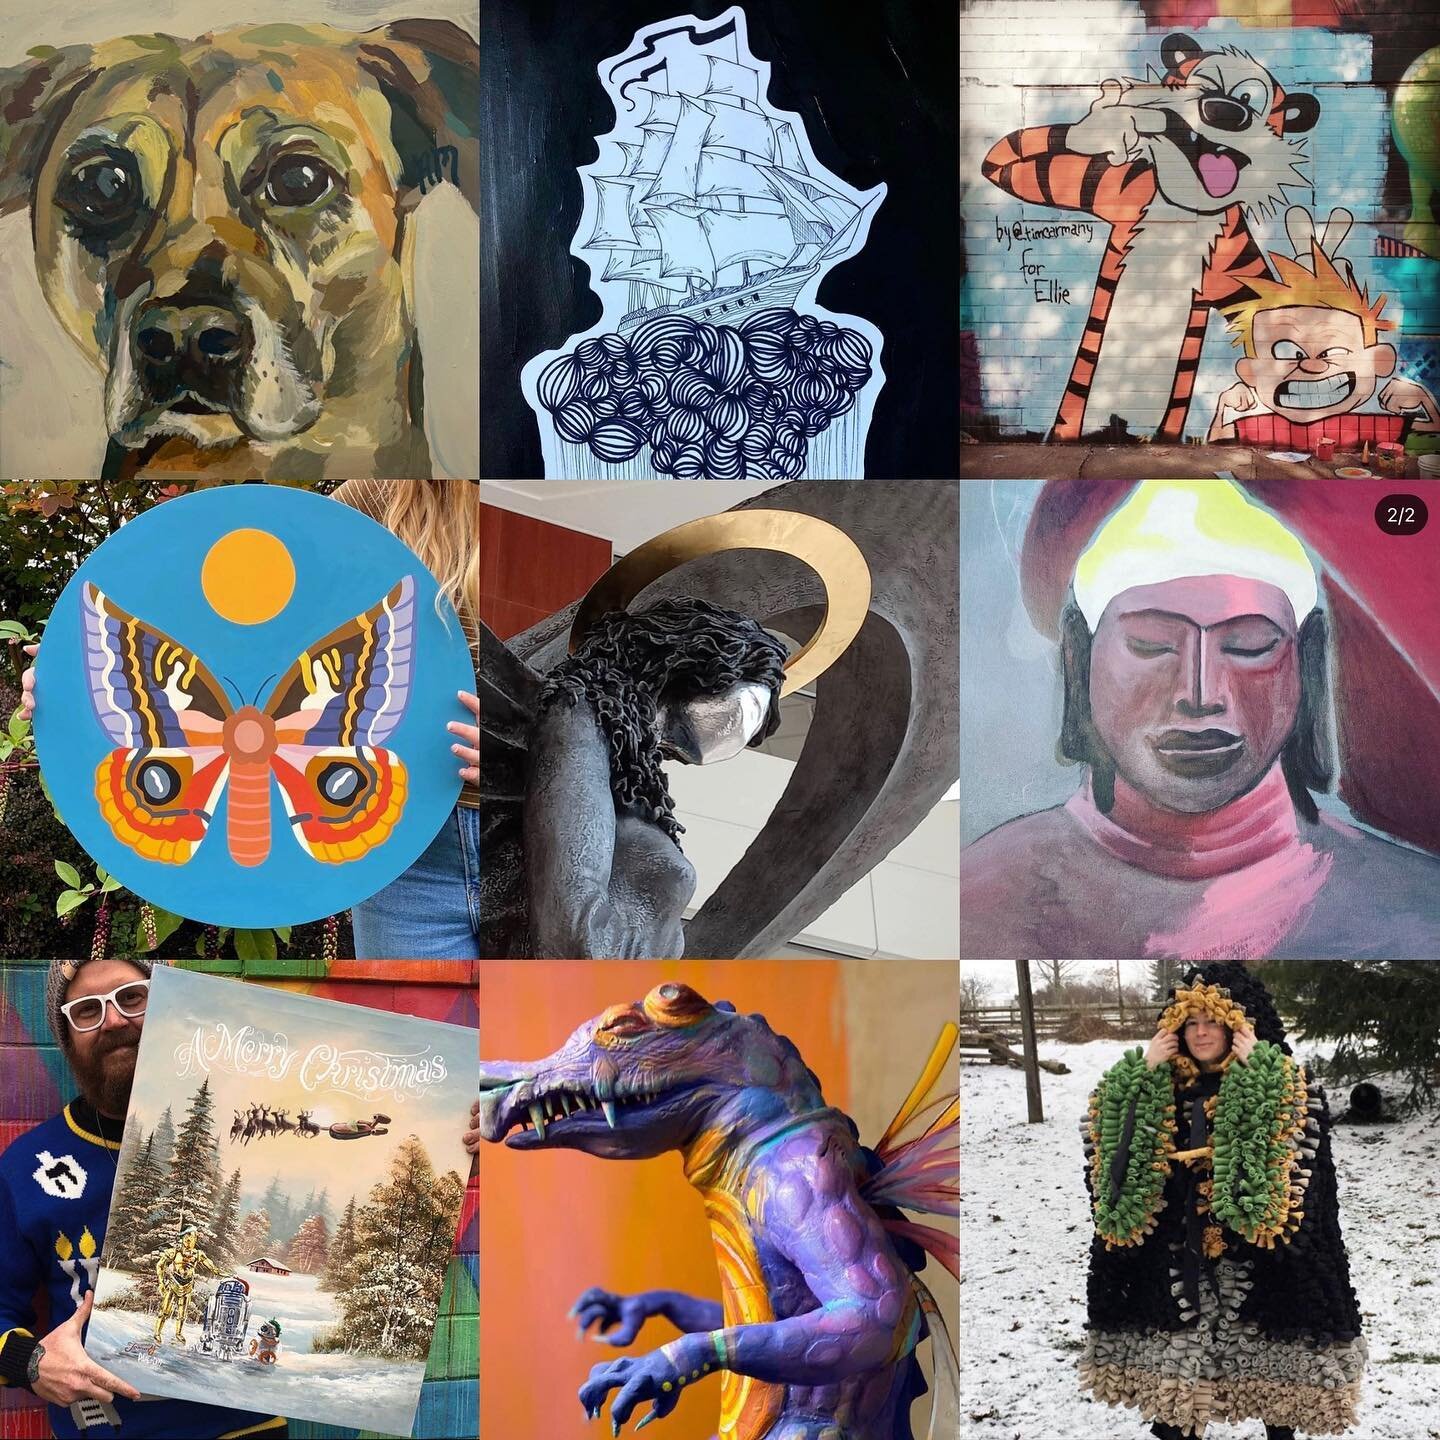 Some of our favorite Hub Artist pieces from 2020...